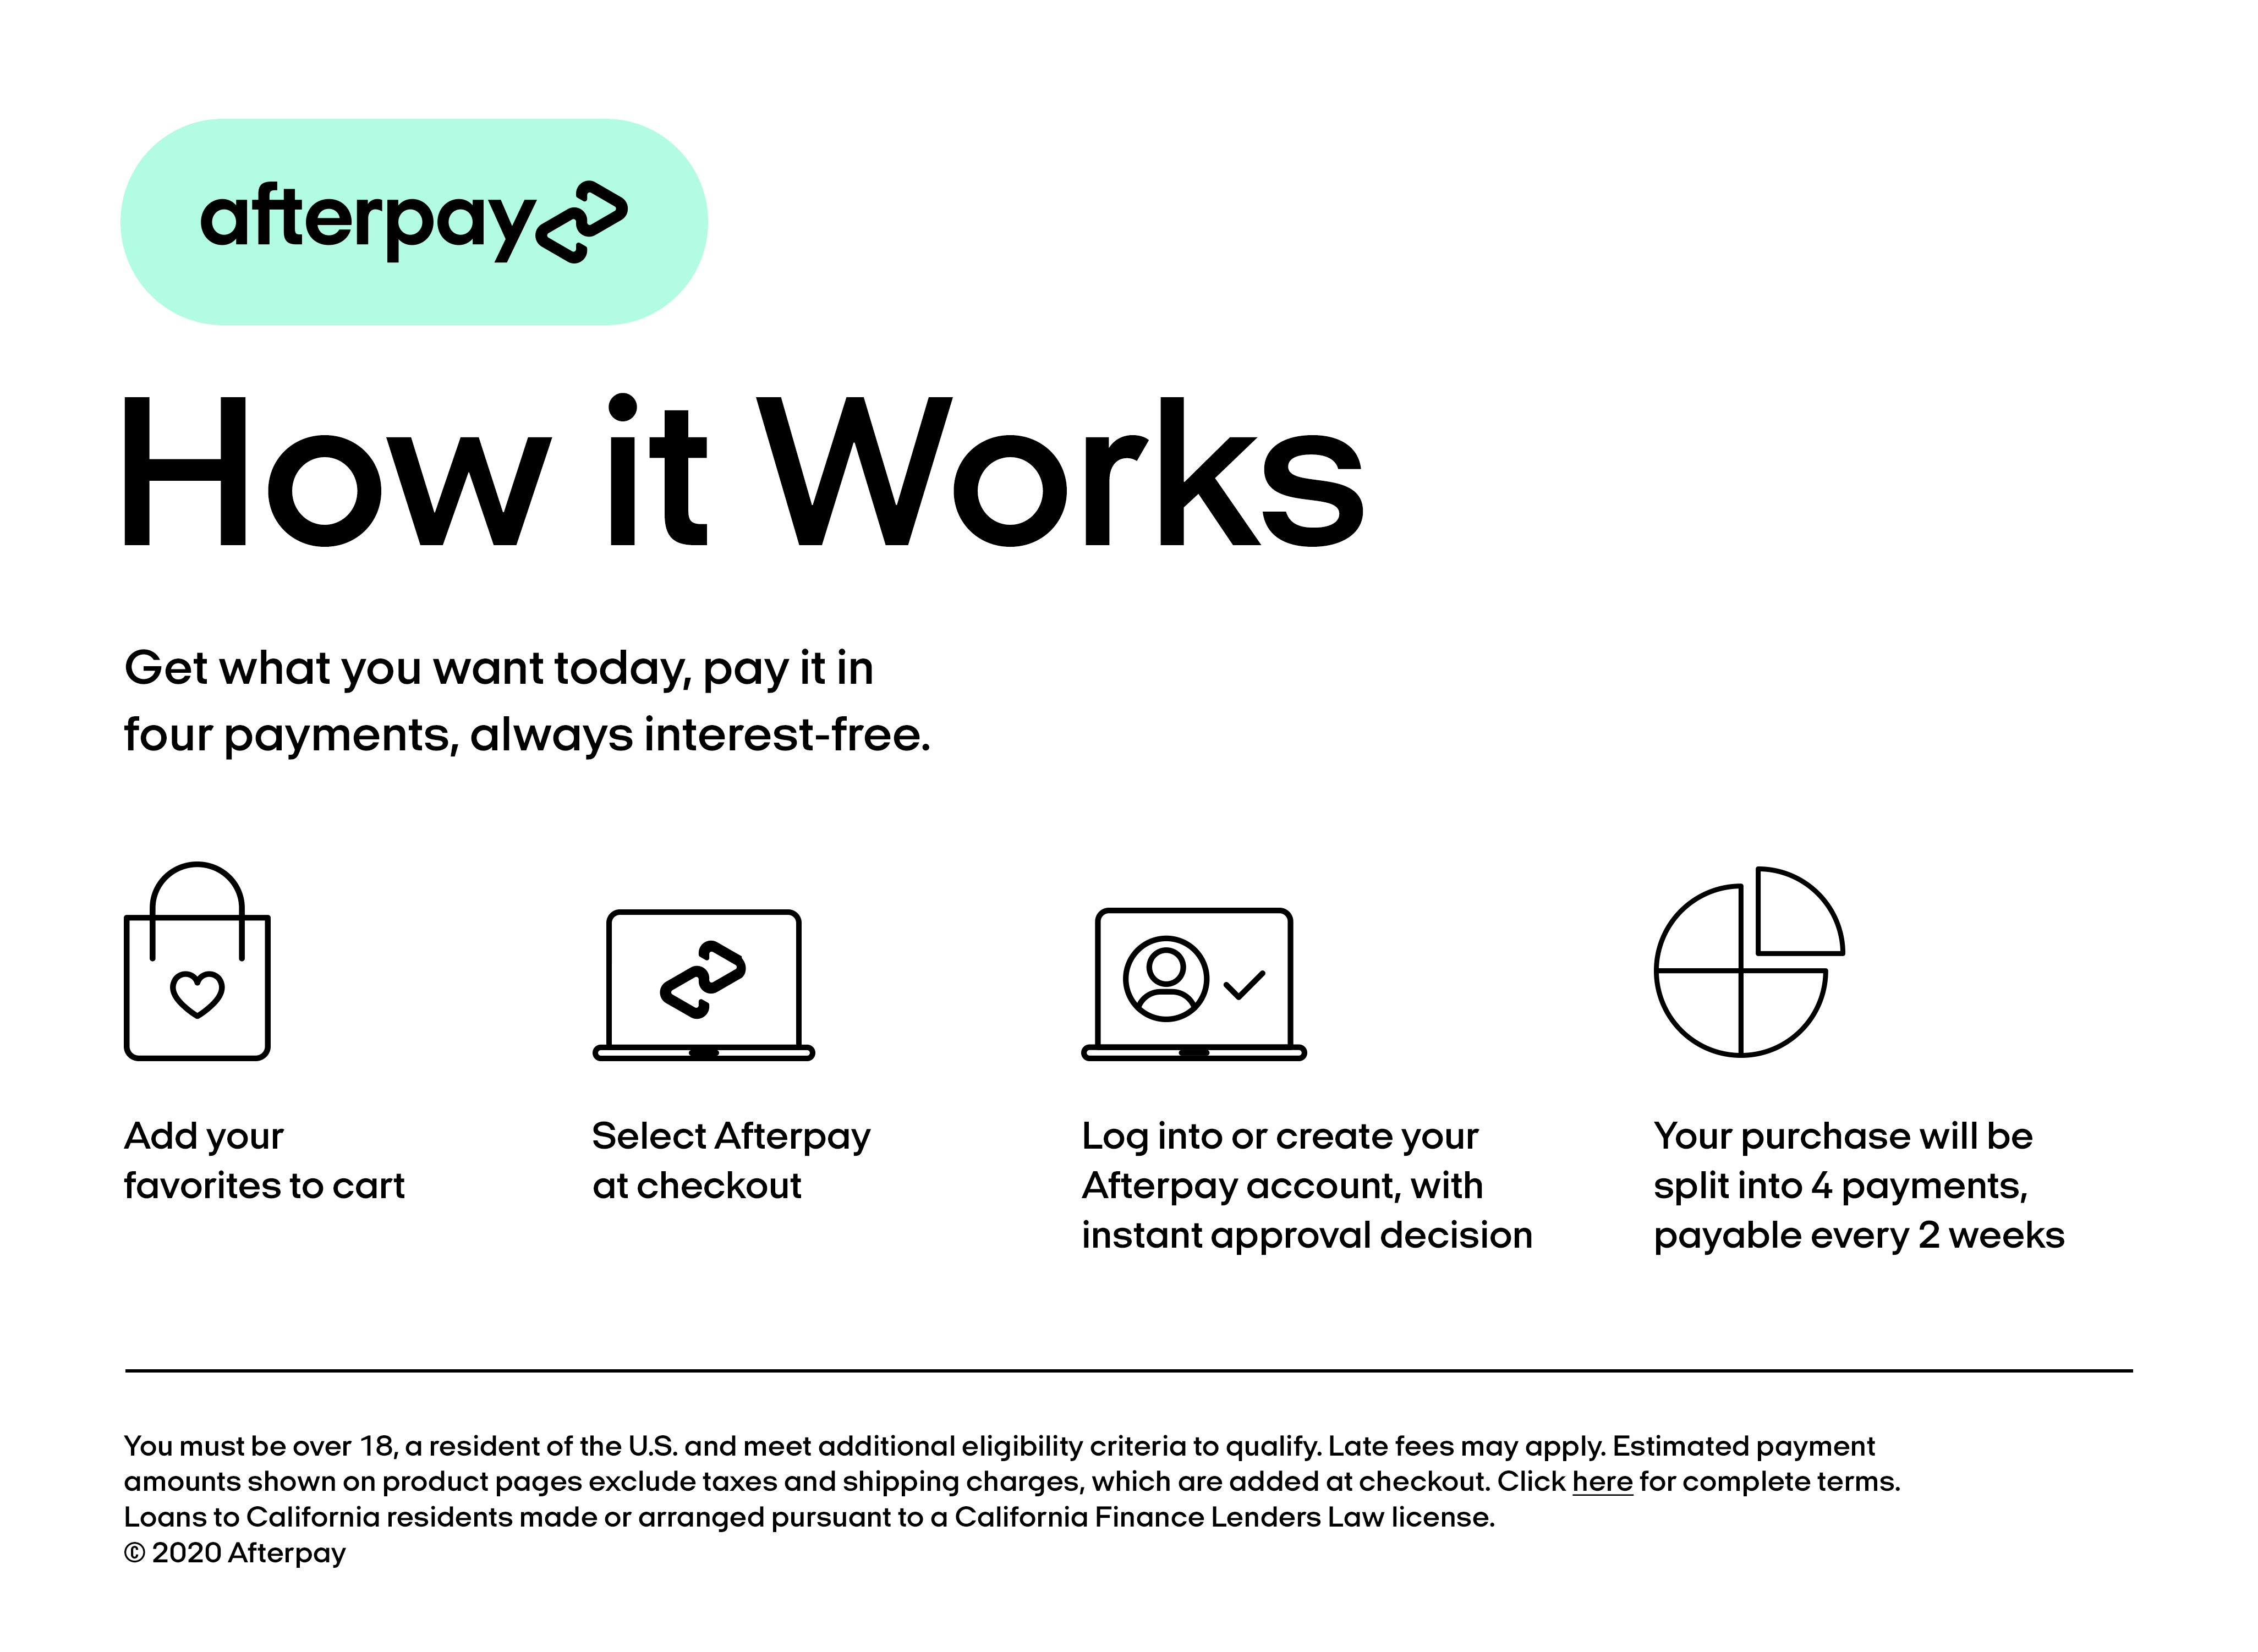 oneworld apparel afterpay how it works guide